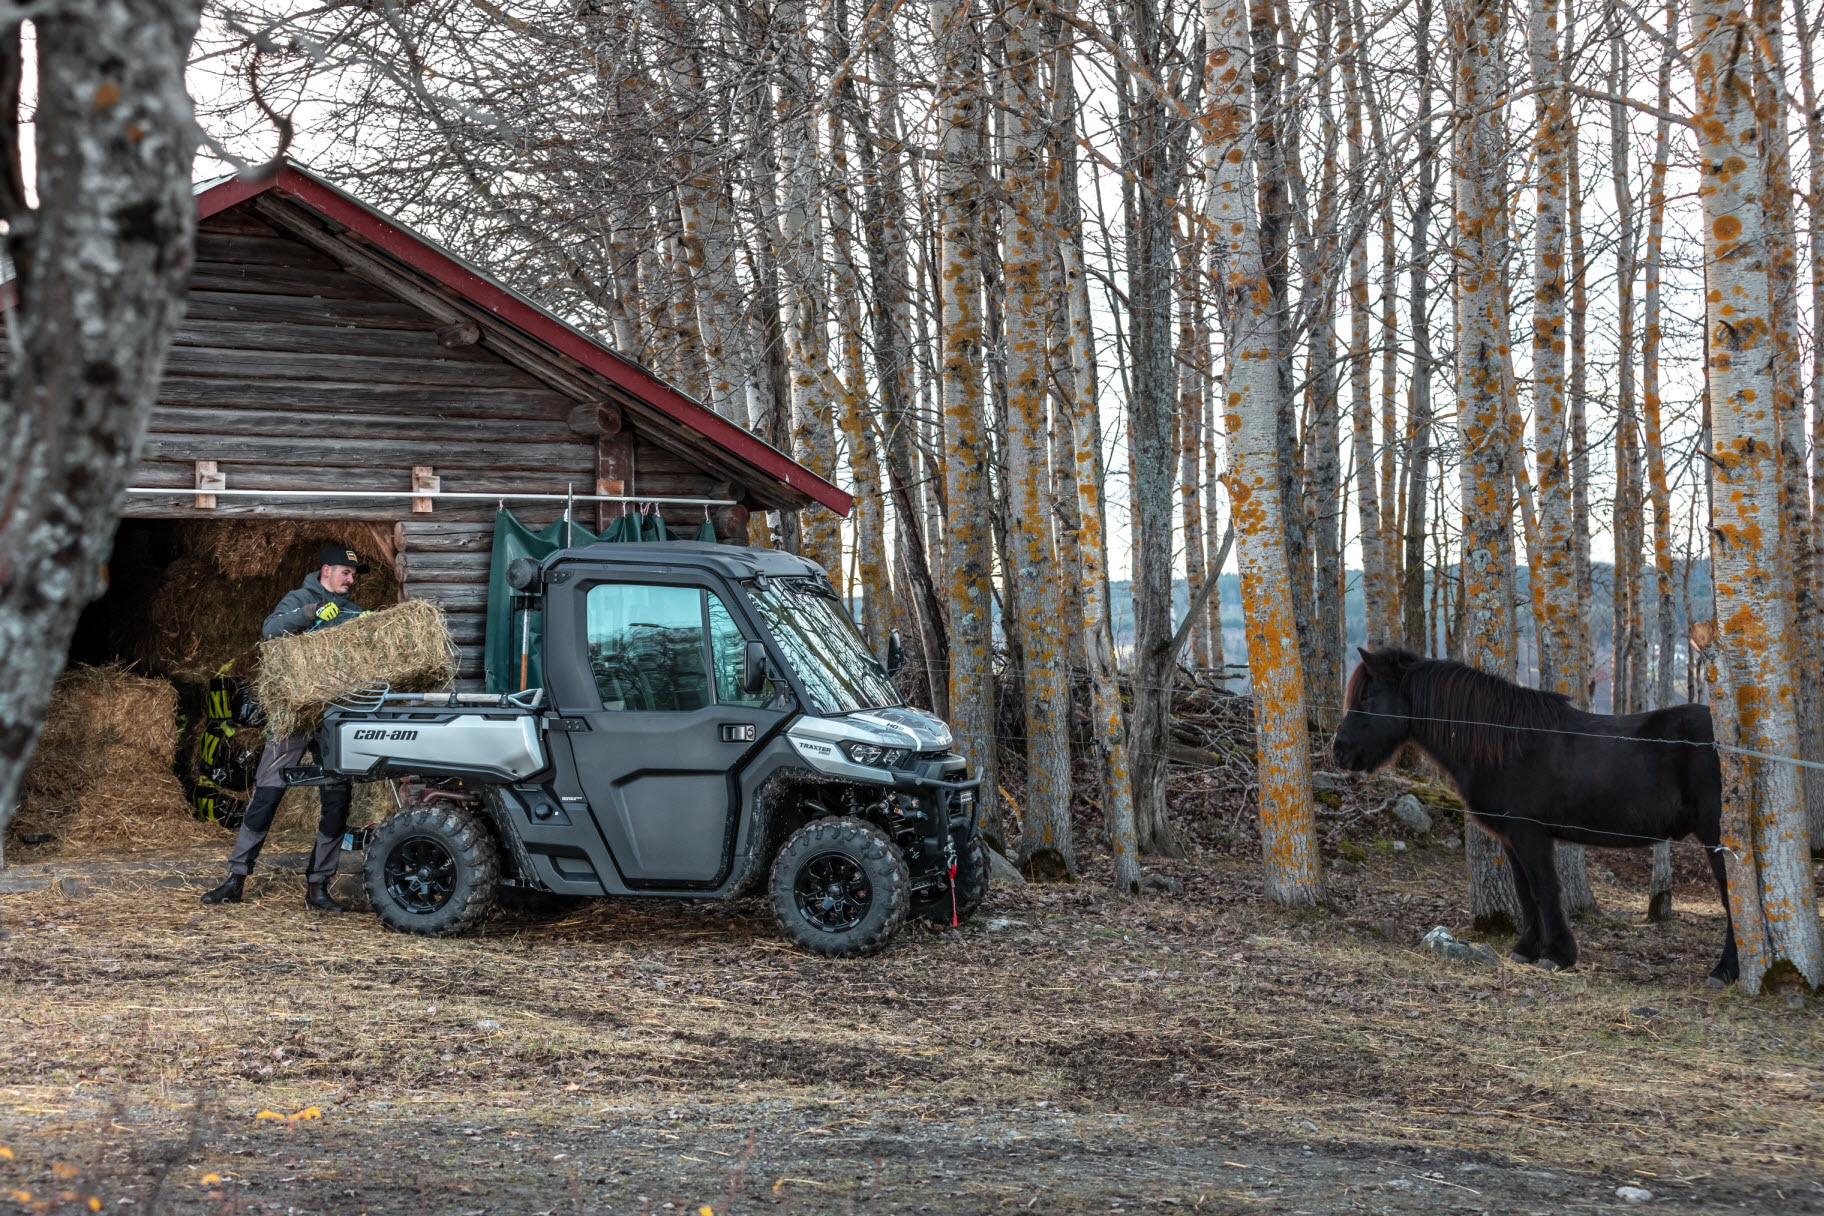 Can-Am Traxter utility med hester